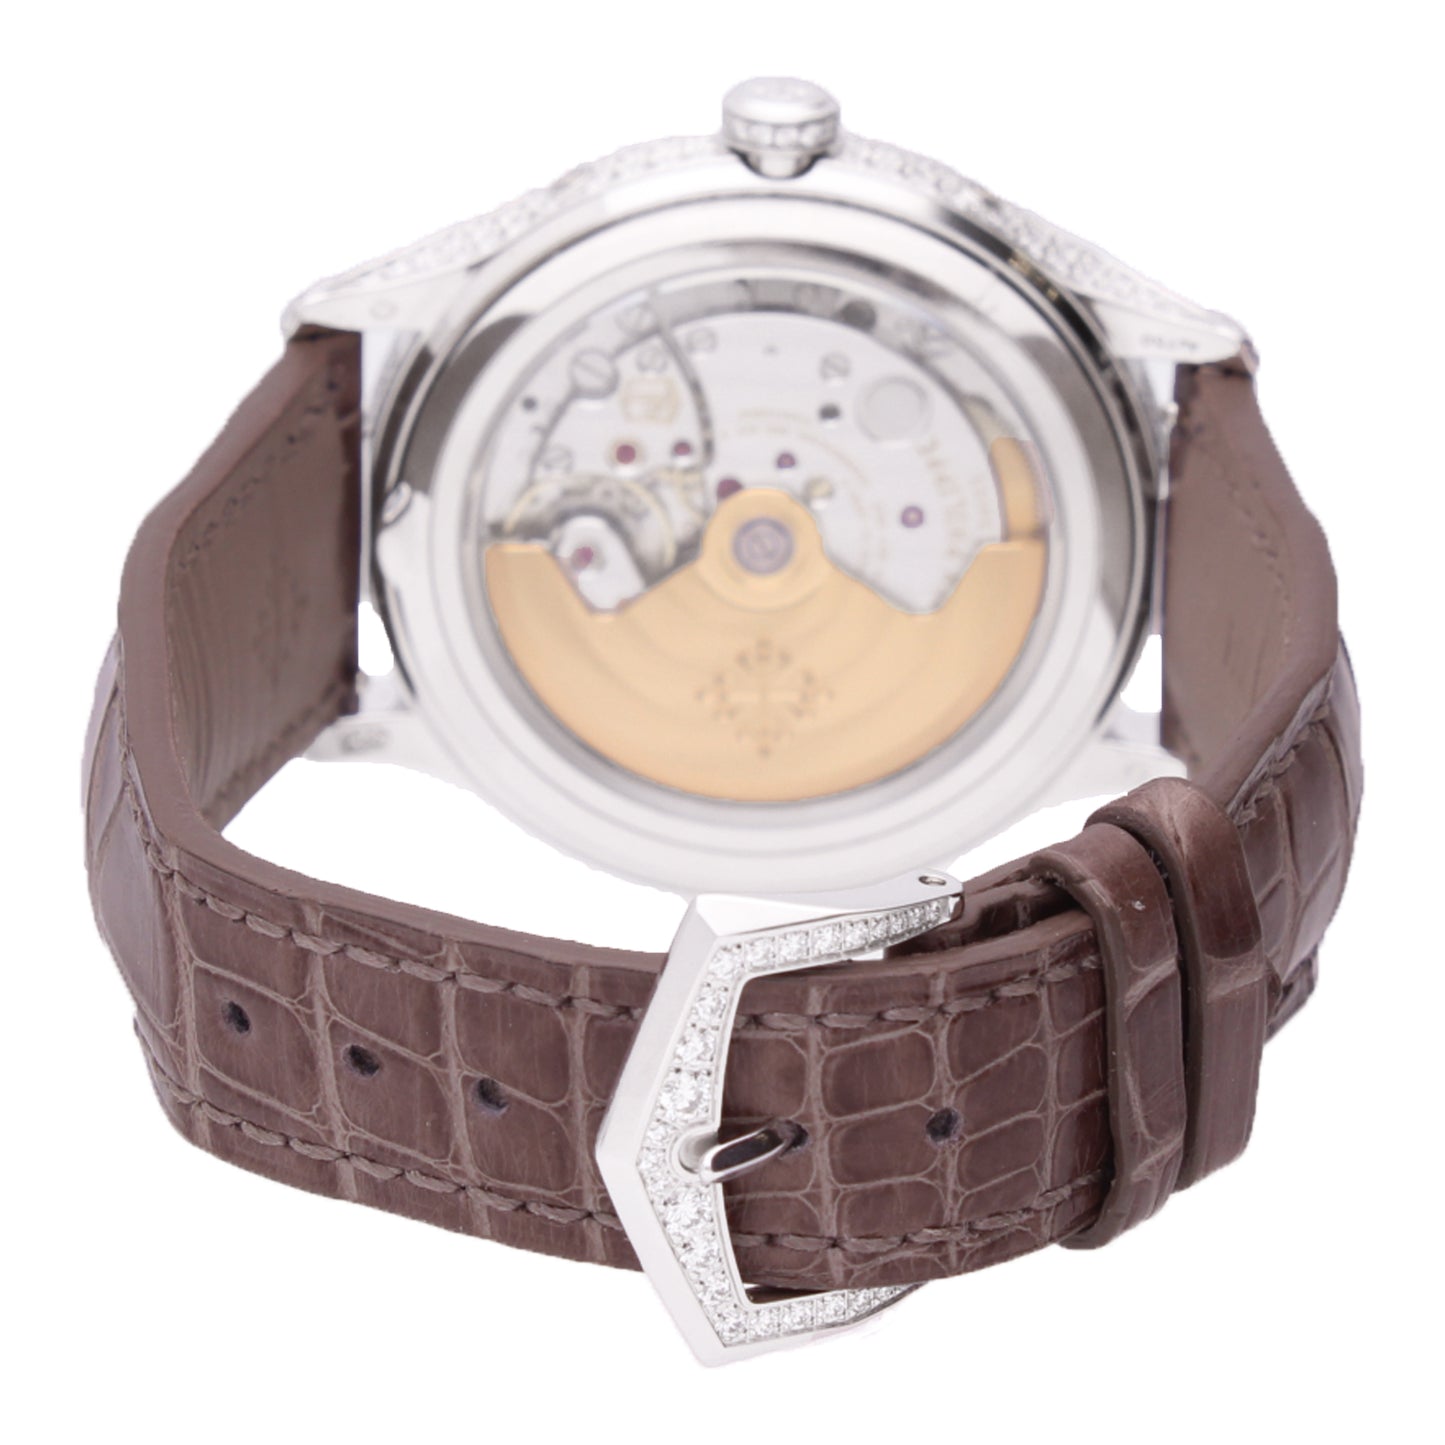 18ct white gold Patek Philippe ref. 4948G-001 automatic annual calendar wristwatch with Mother of Pearl dial. Made 2015